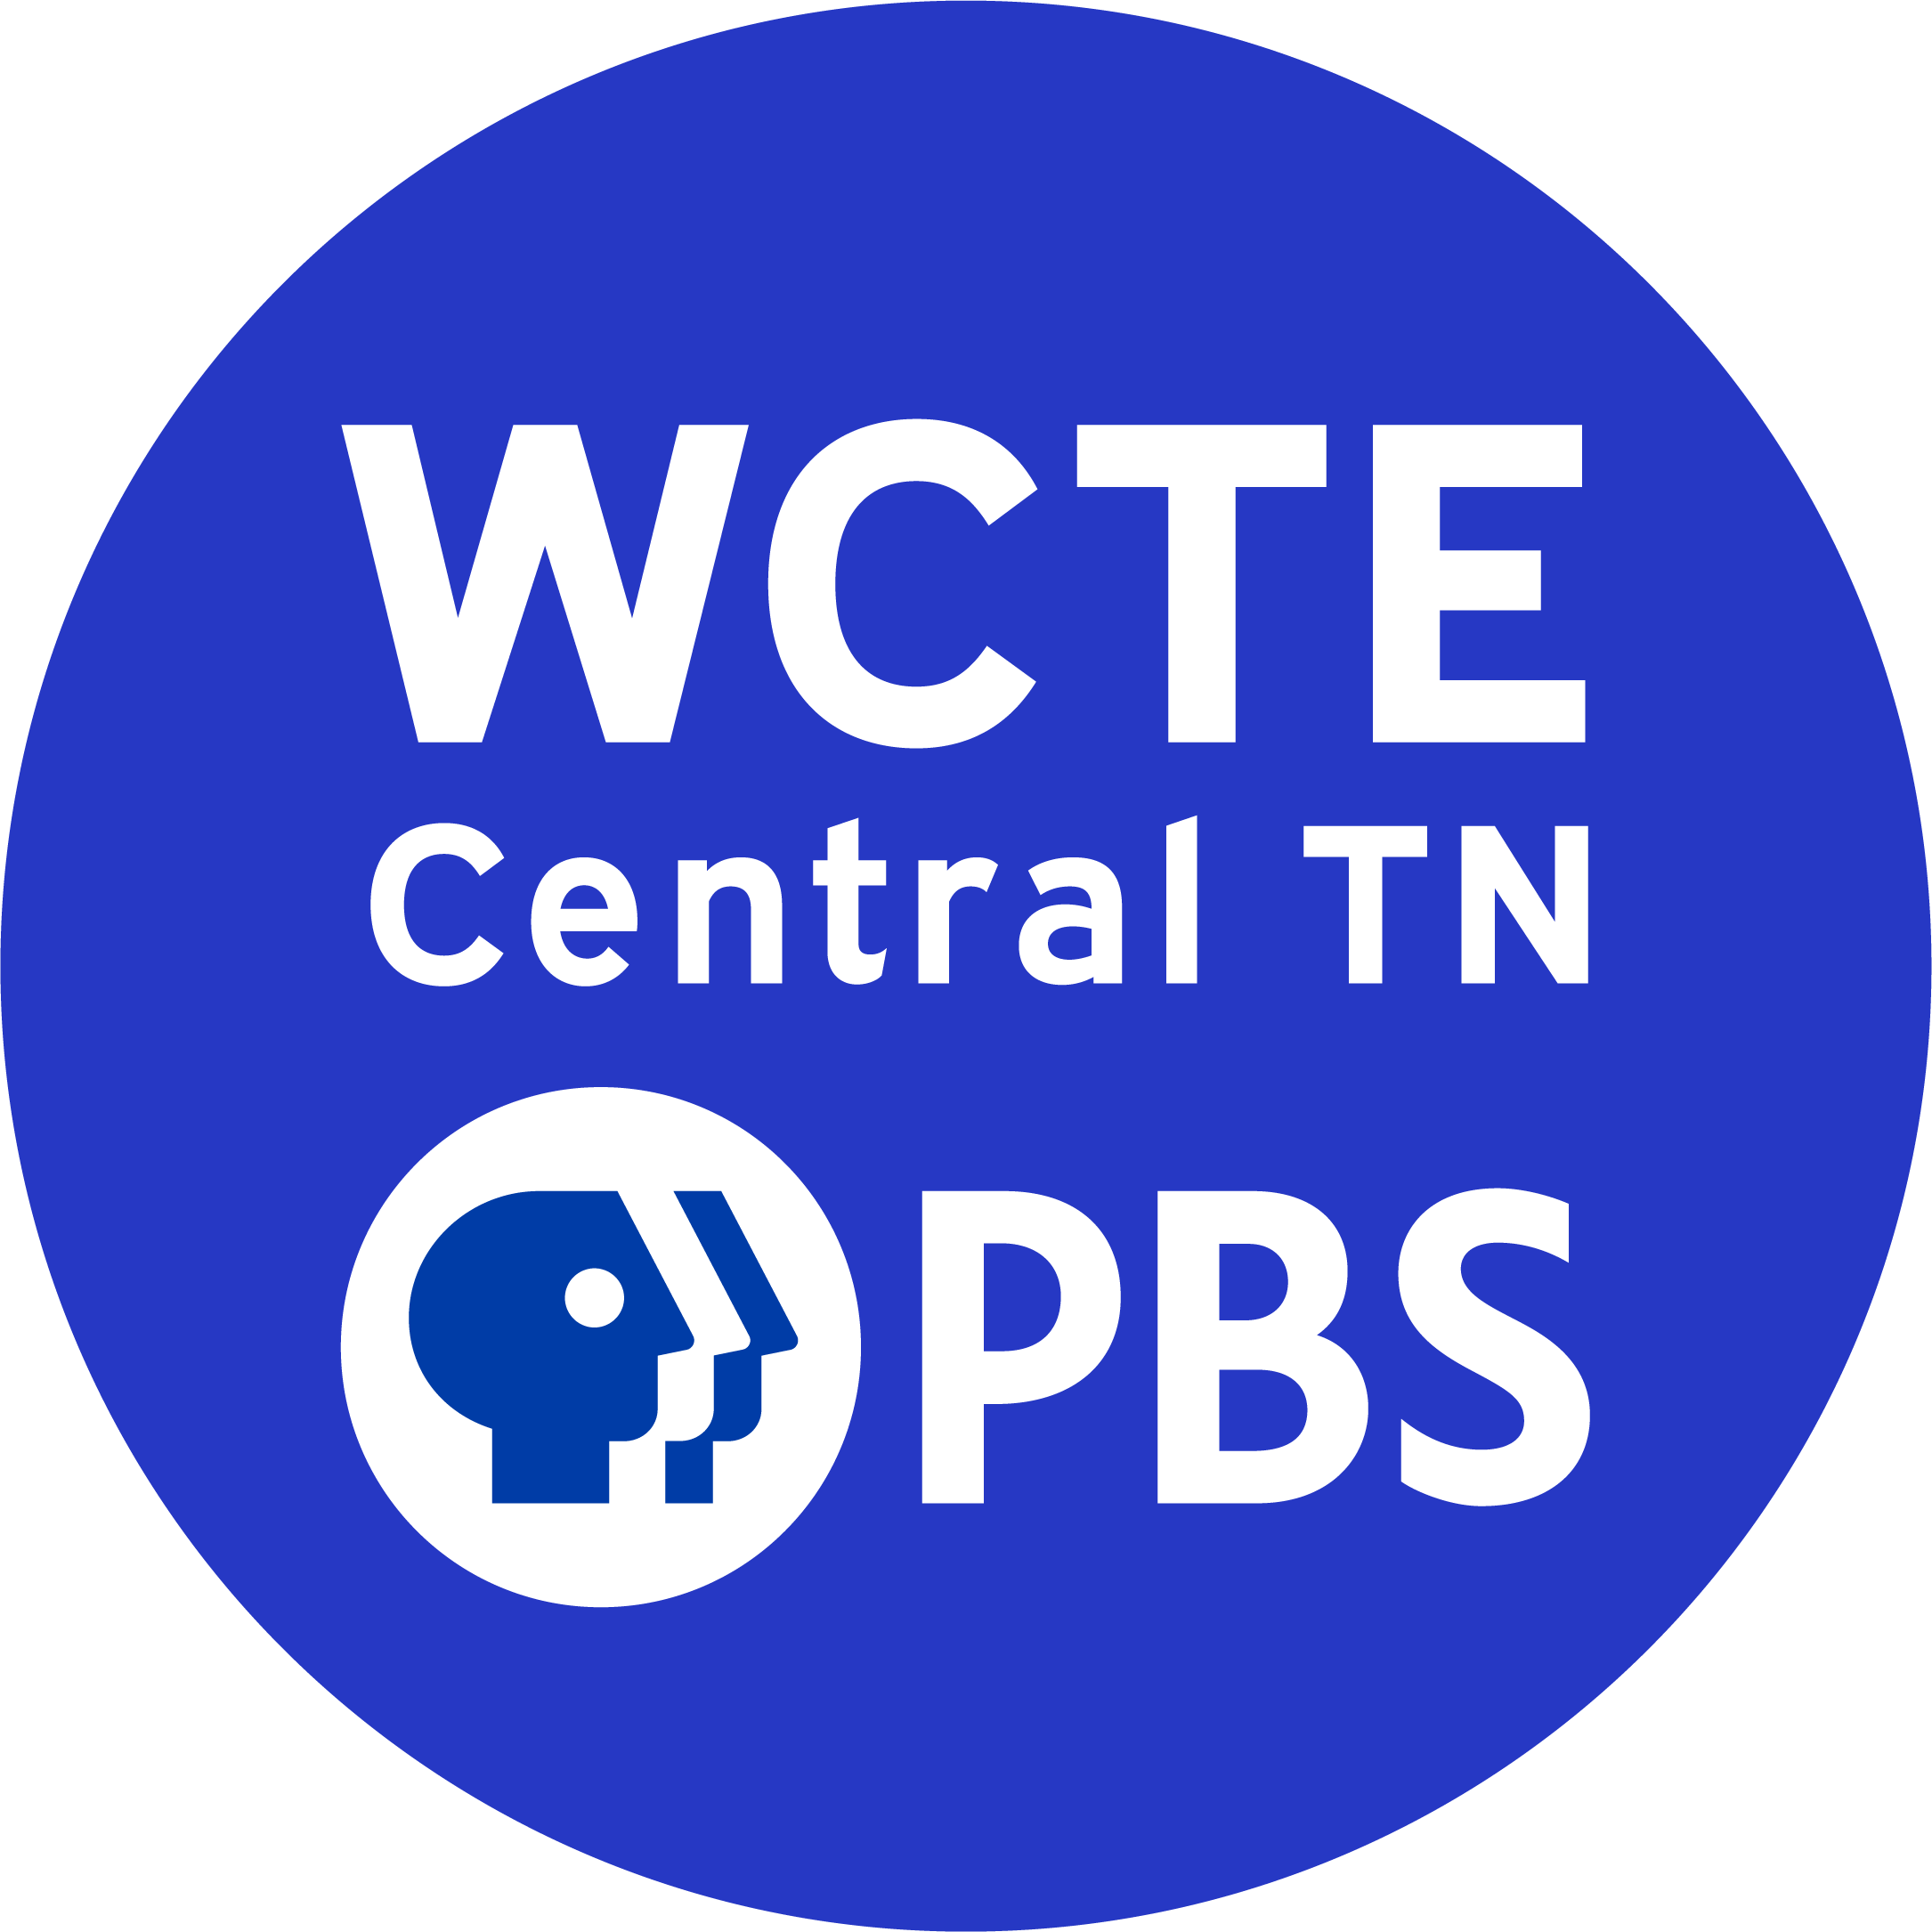 WCTE Contact Information